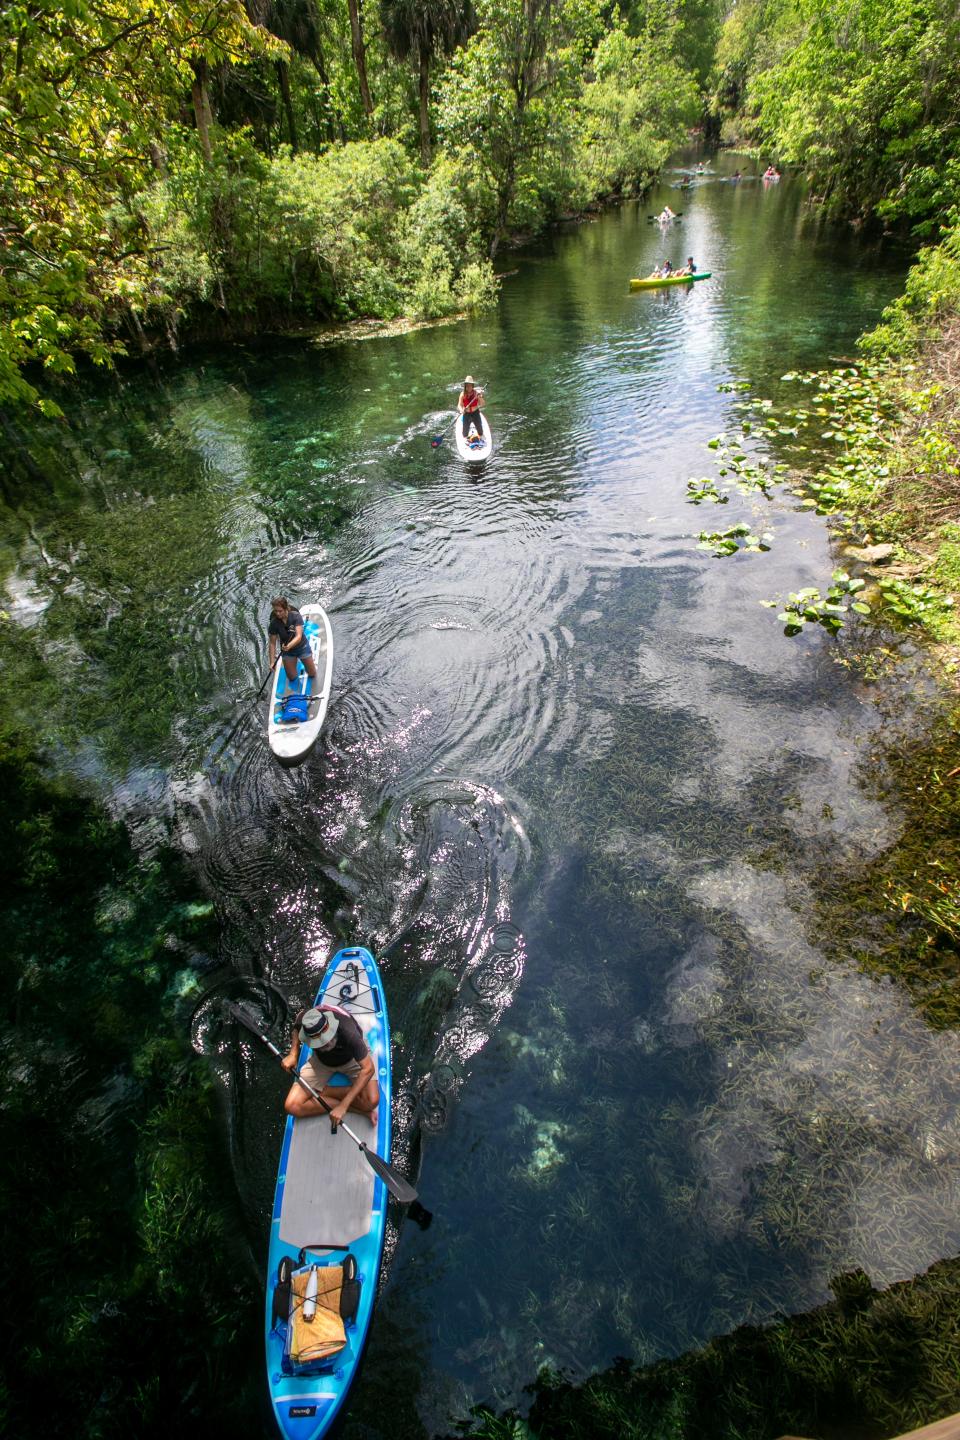 Paddlers head out from the canoe launch at the Silver Springs State Park. Silver Springs is a first-magnitude spring that forms the headwaters of the Silver River.